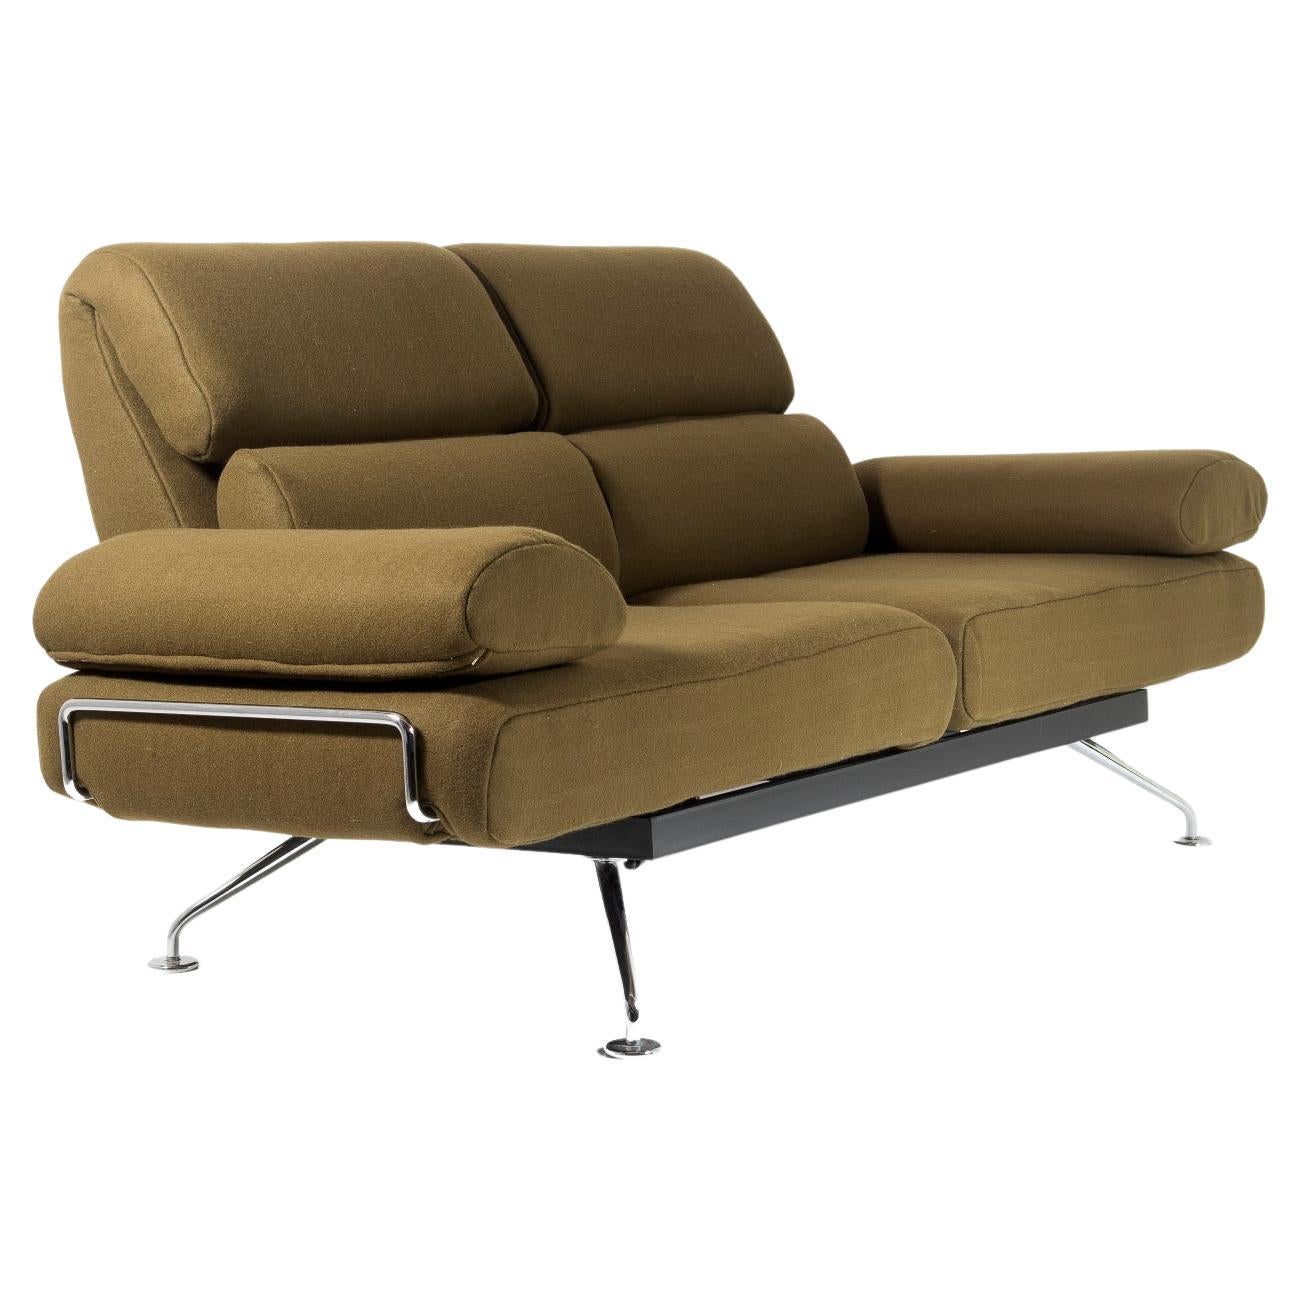 1980s Two Seater Day Bed Recliner Sofa in Olive Green - De-Sede Ds 470 Couch